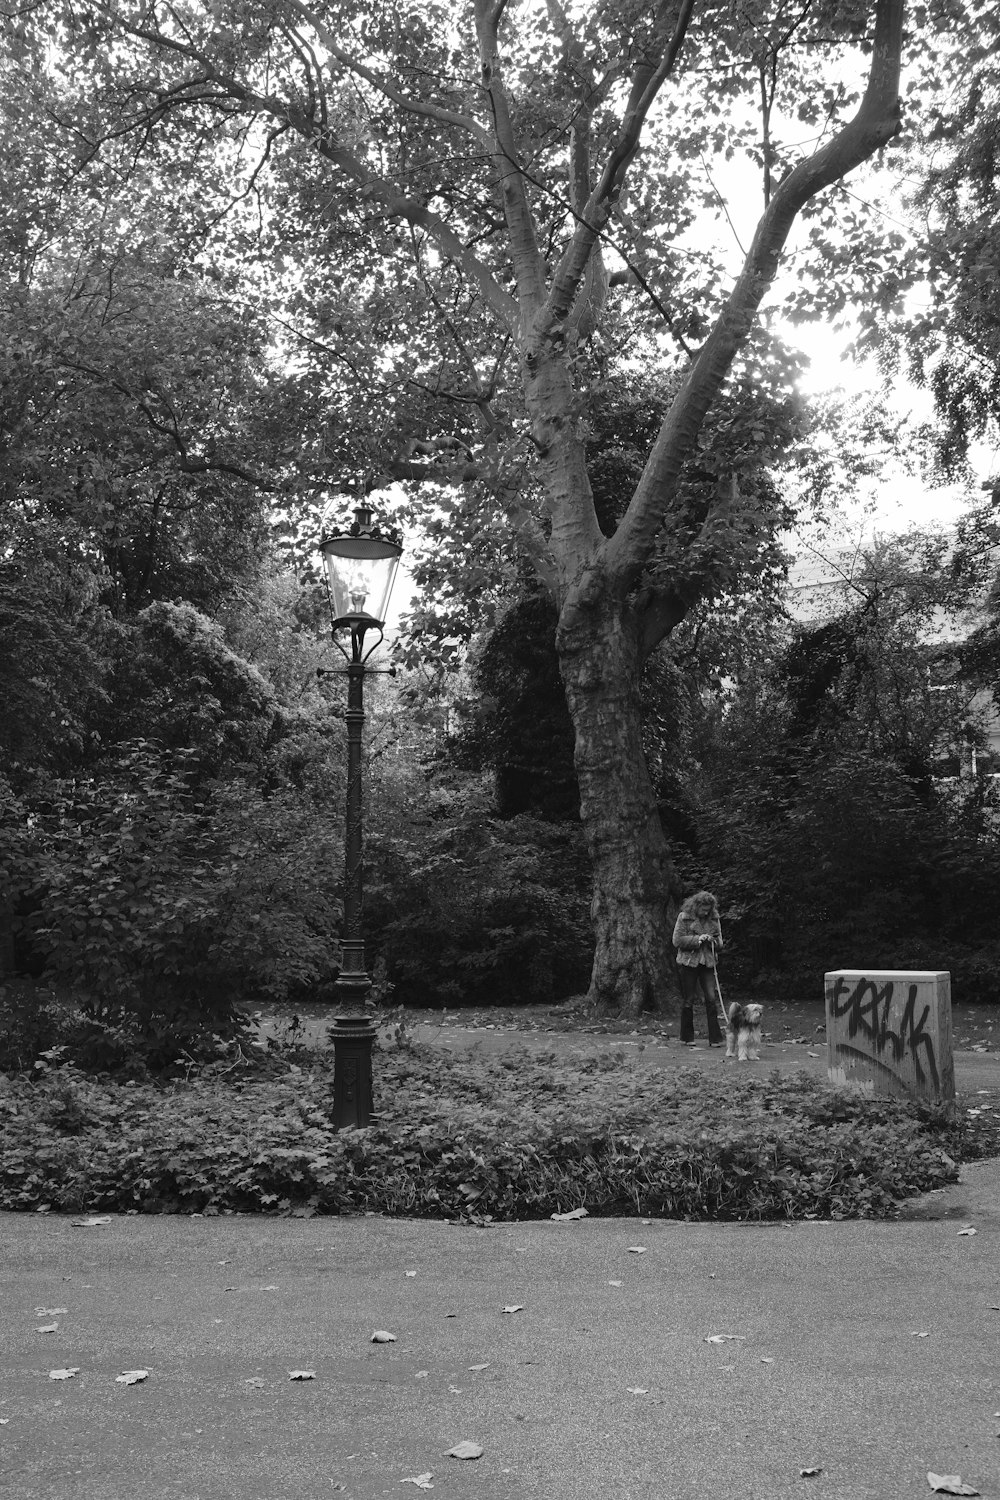 a black and white photo of a park with a lamp post